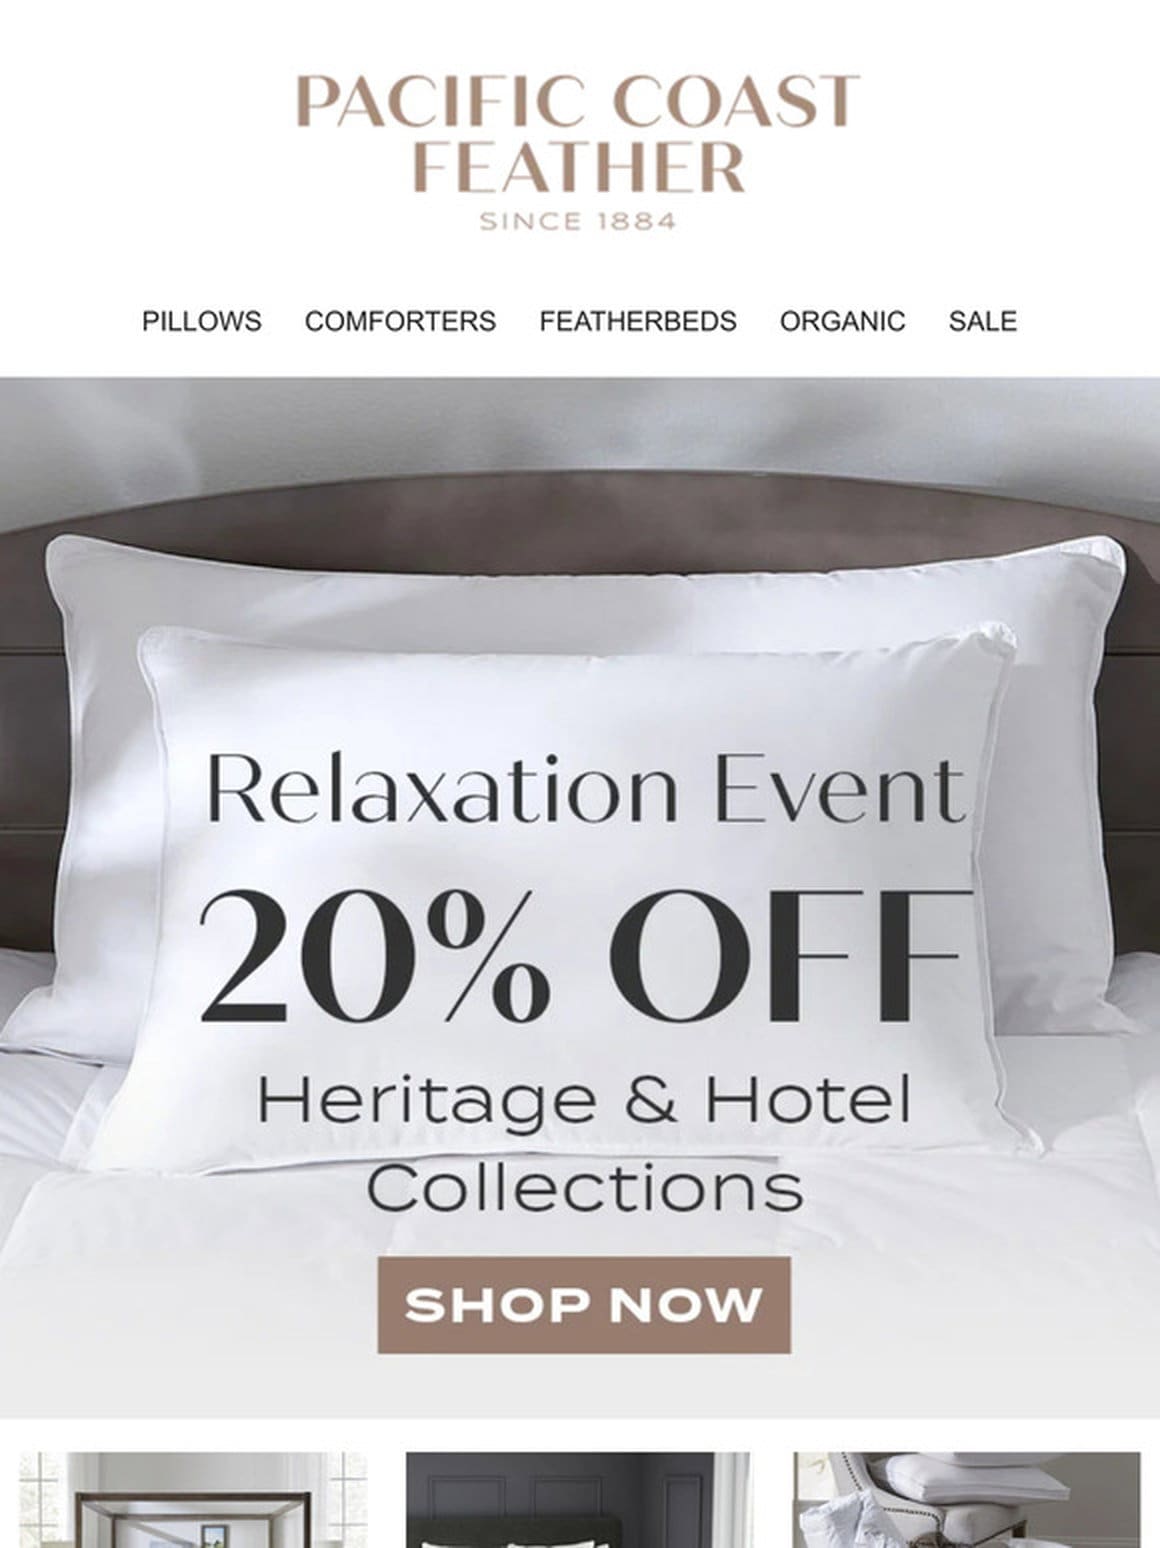 Relax With 20% OFF The Heritage & Hotel Collections